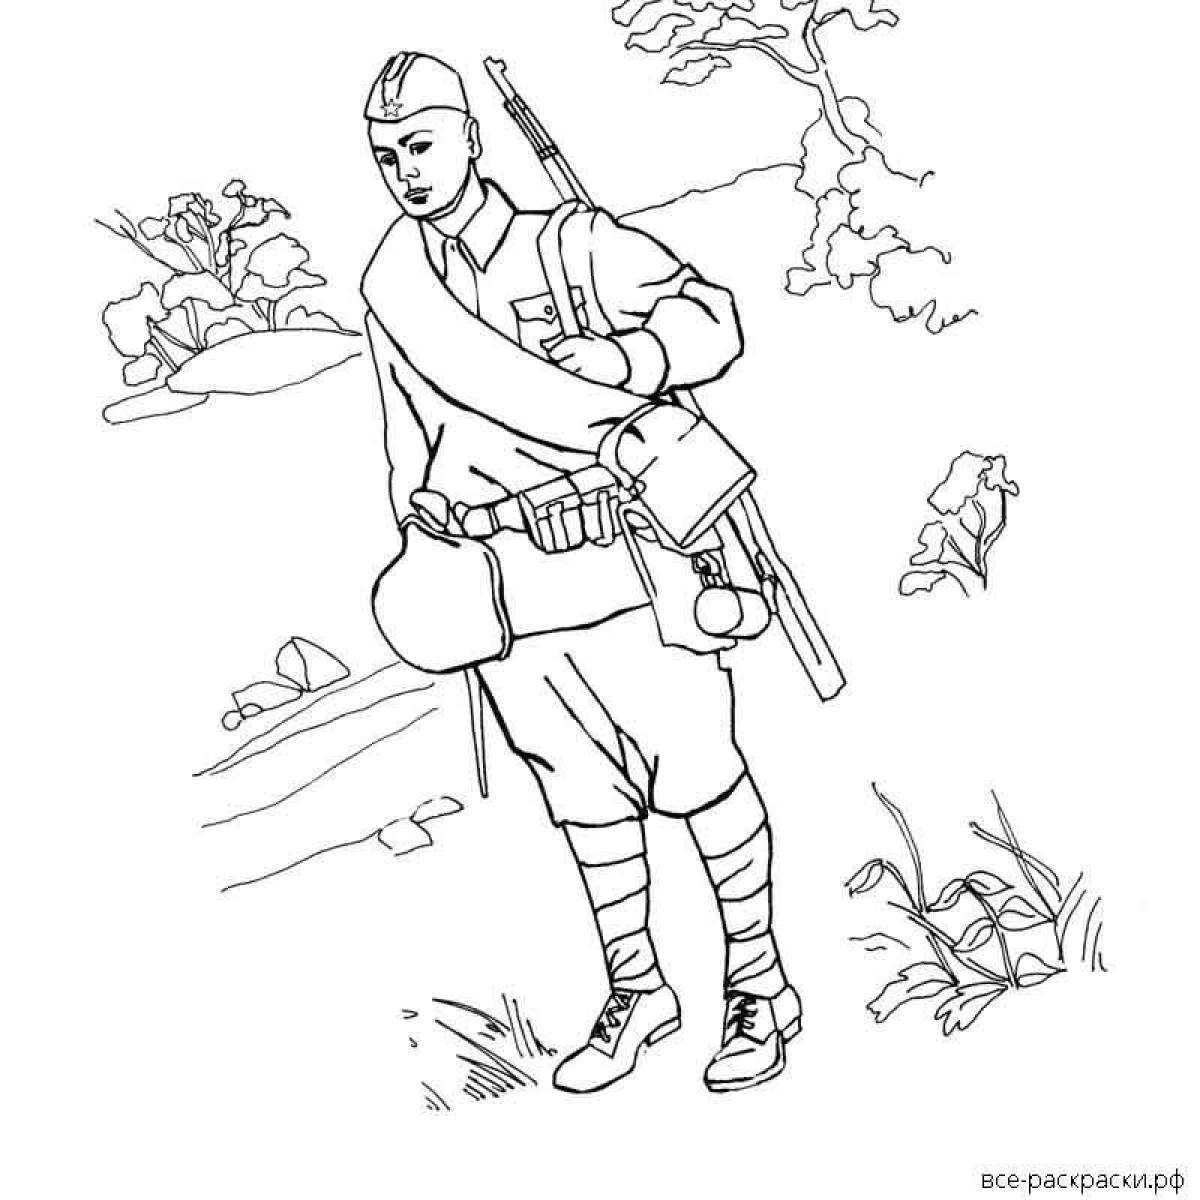 A fascinating coloring of soldiers for children